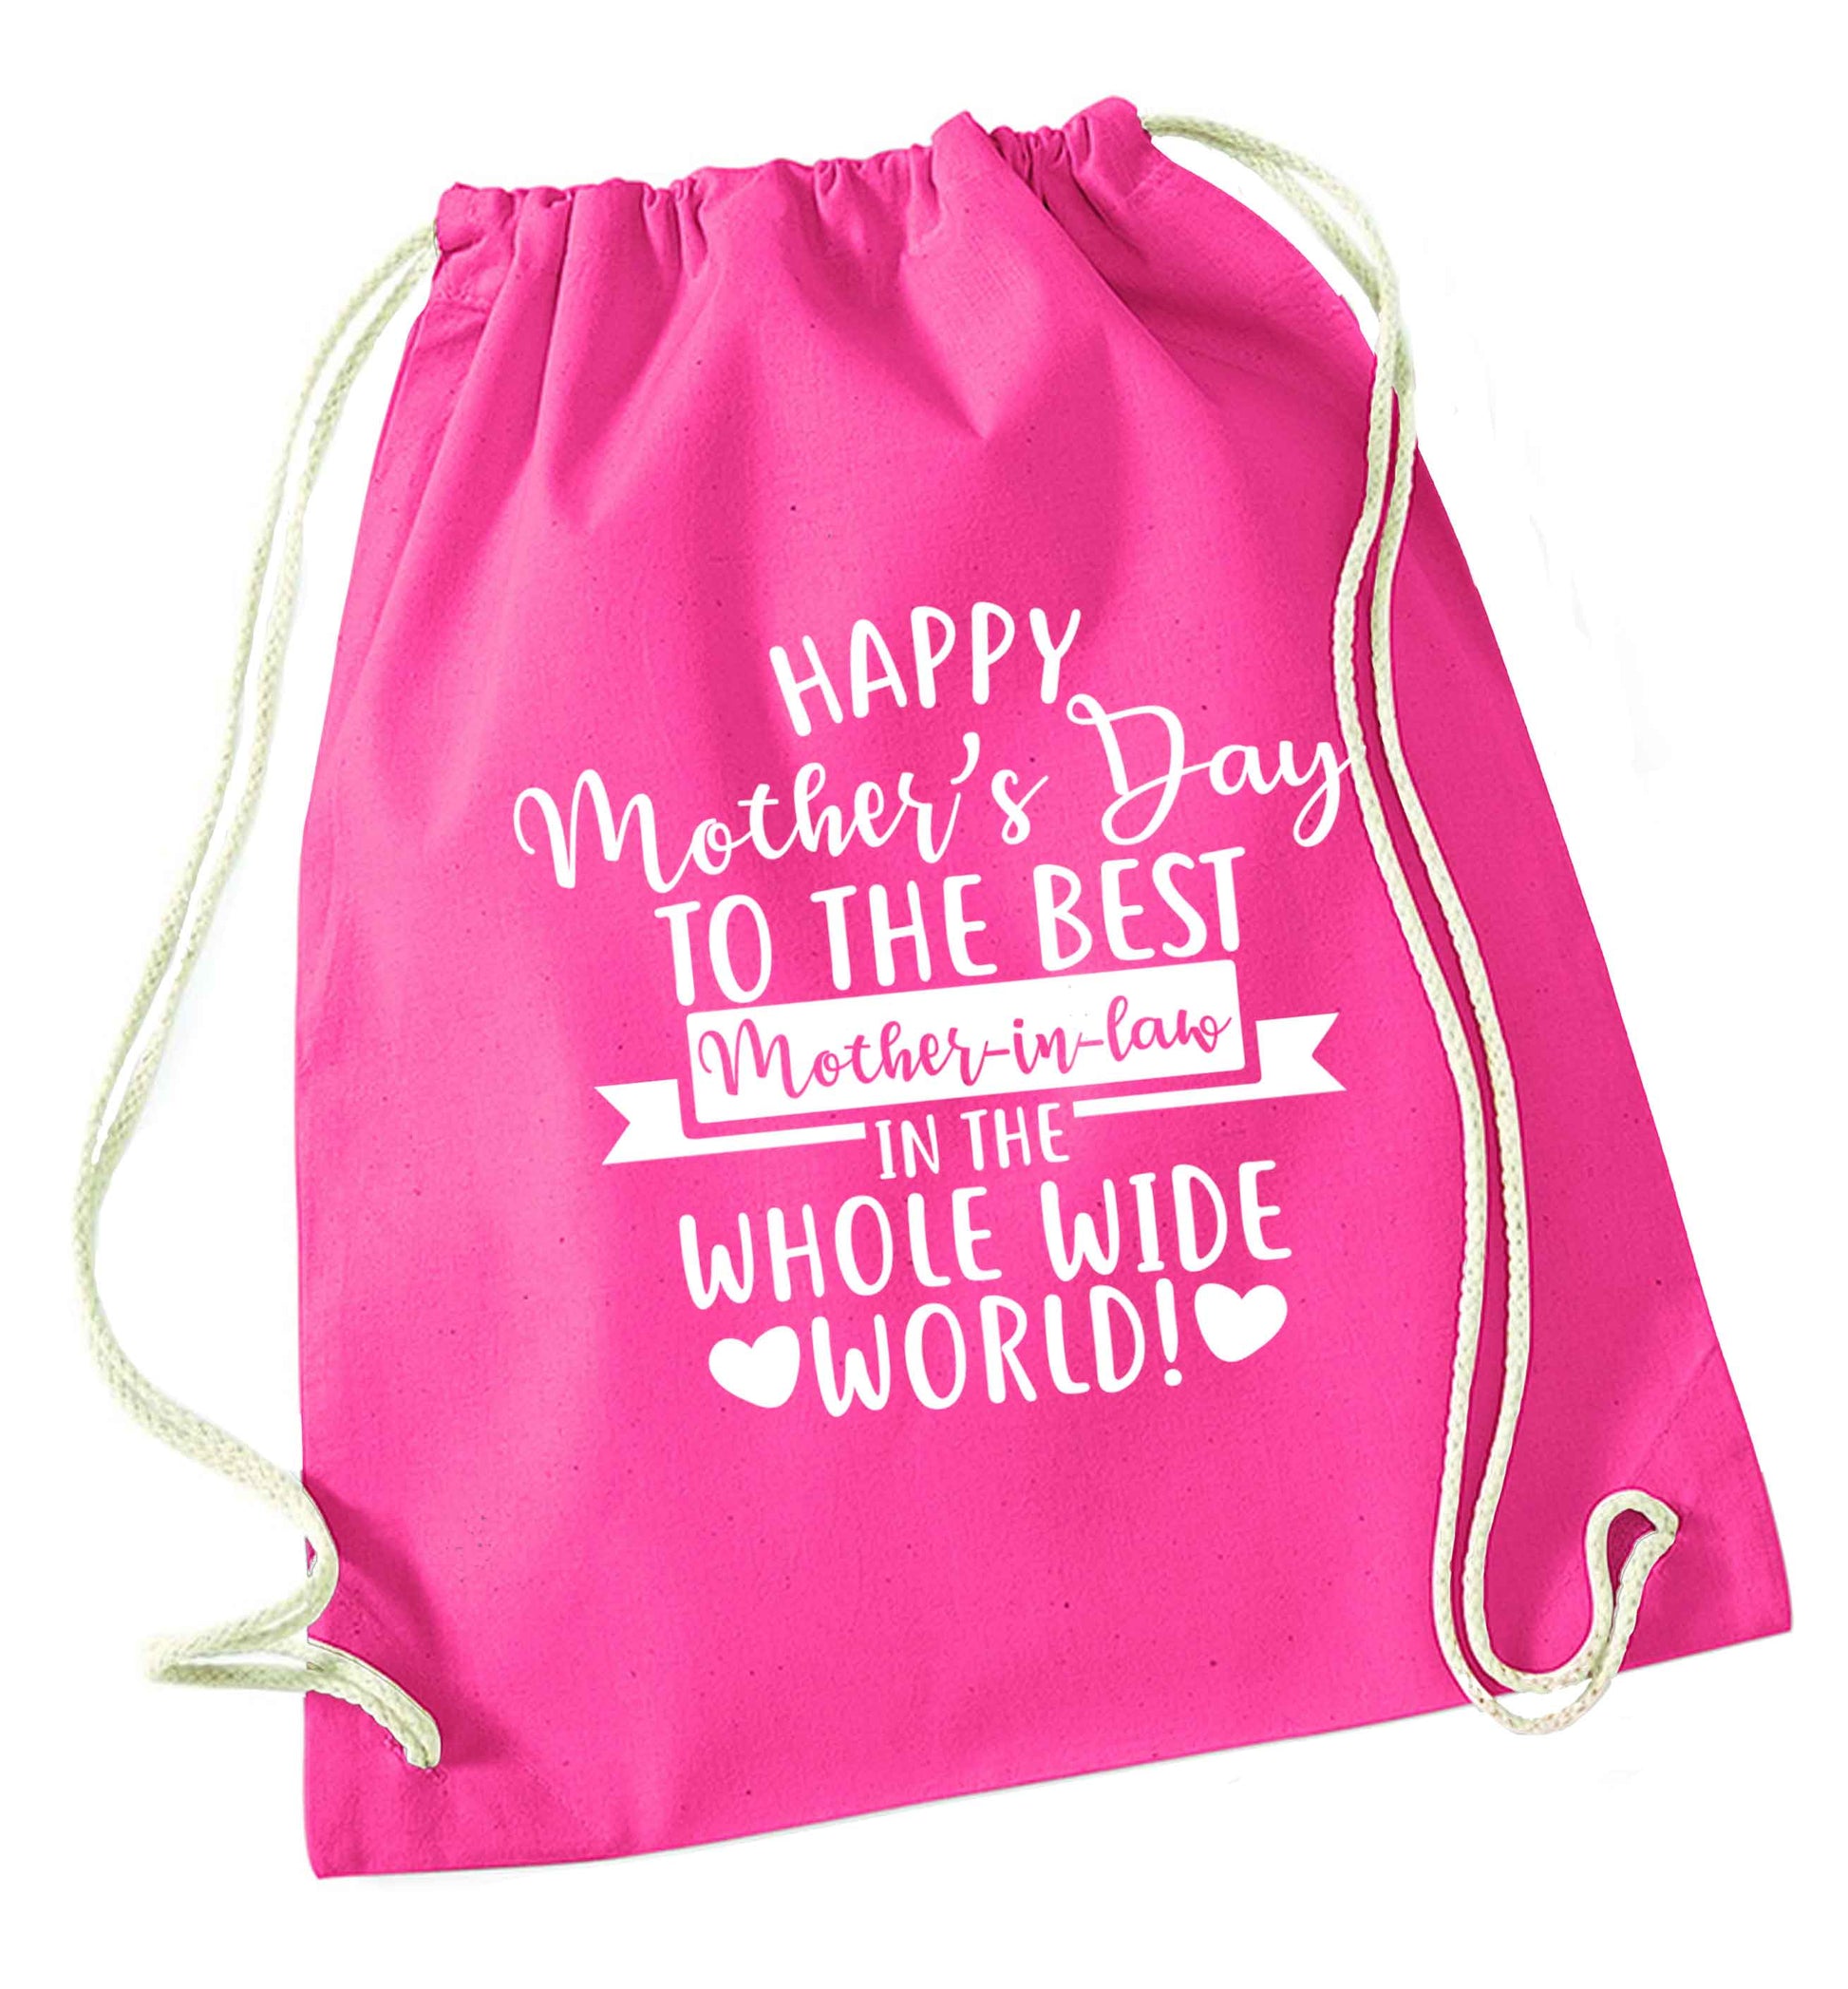 Happy mother's day to the best mother-in law in the world pink drawstring bag